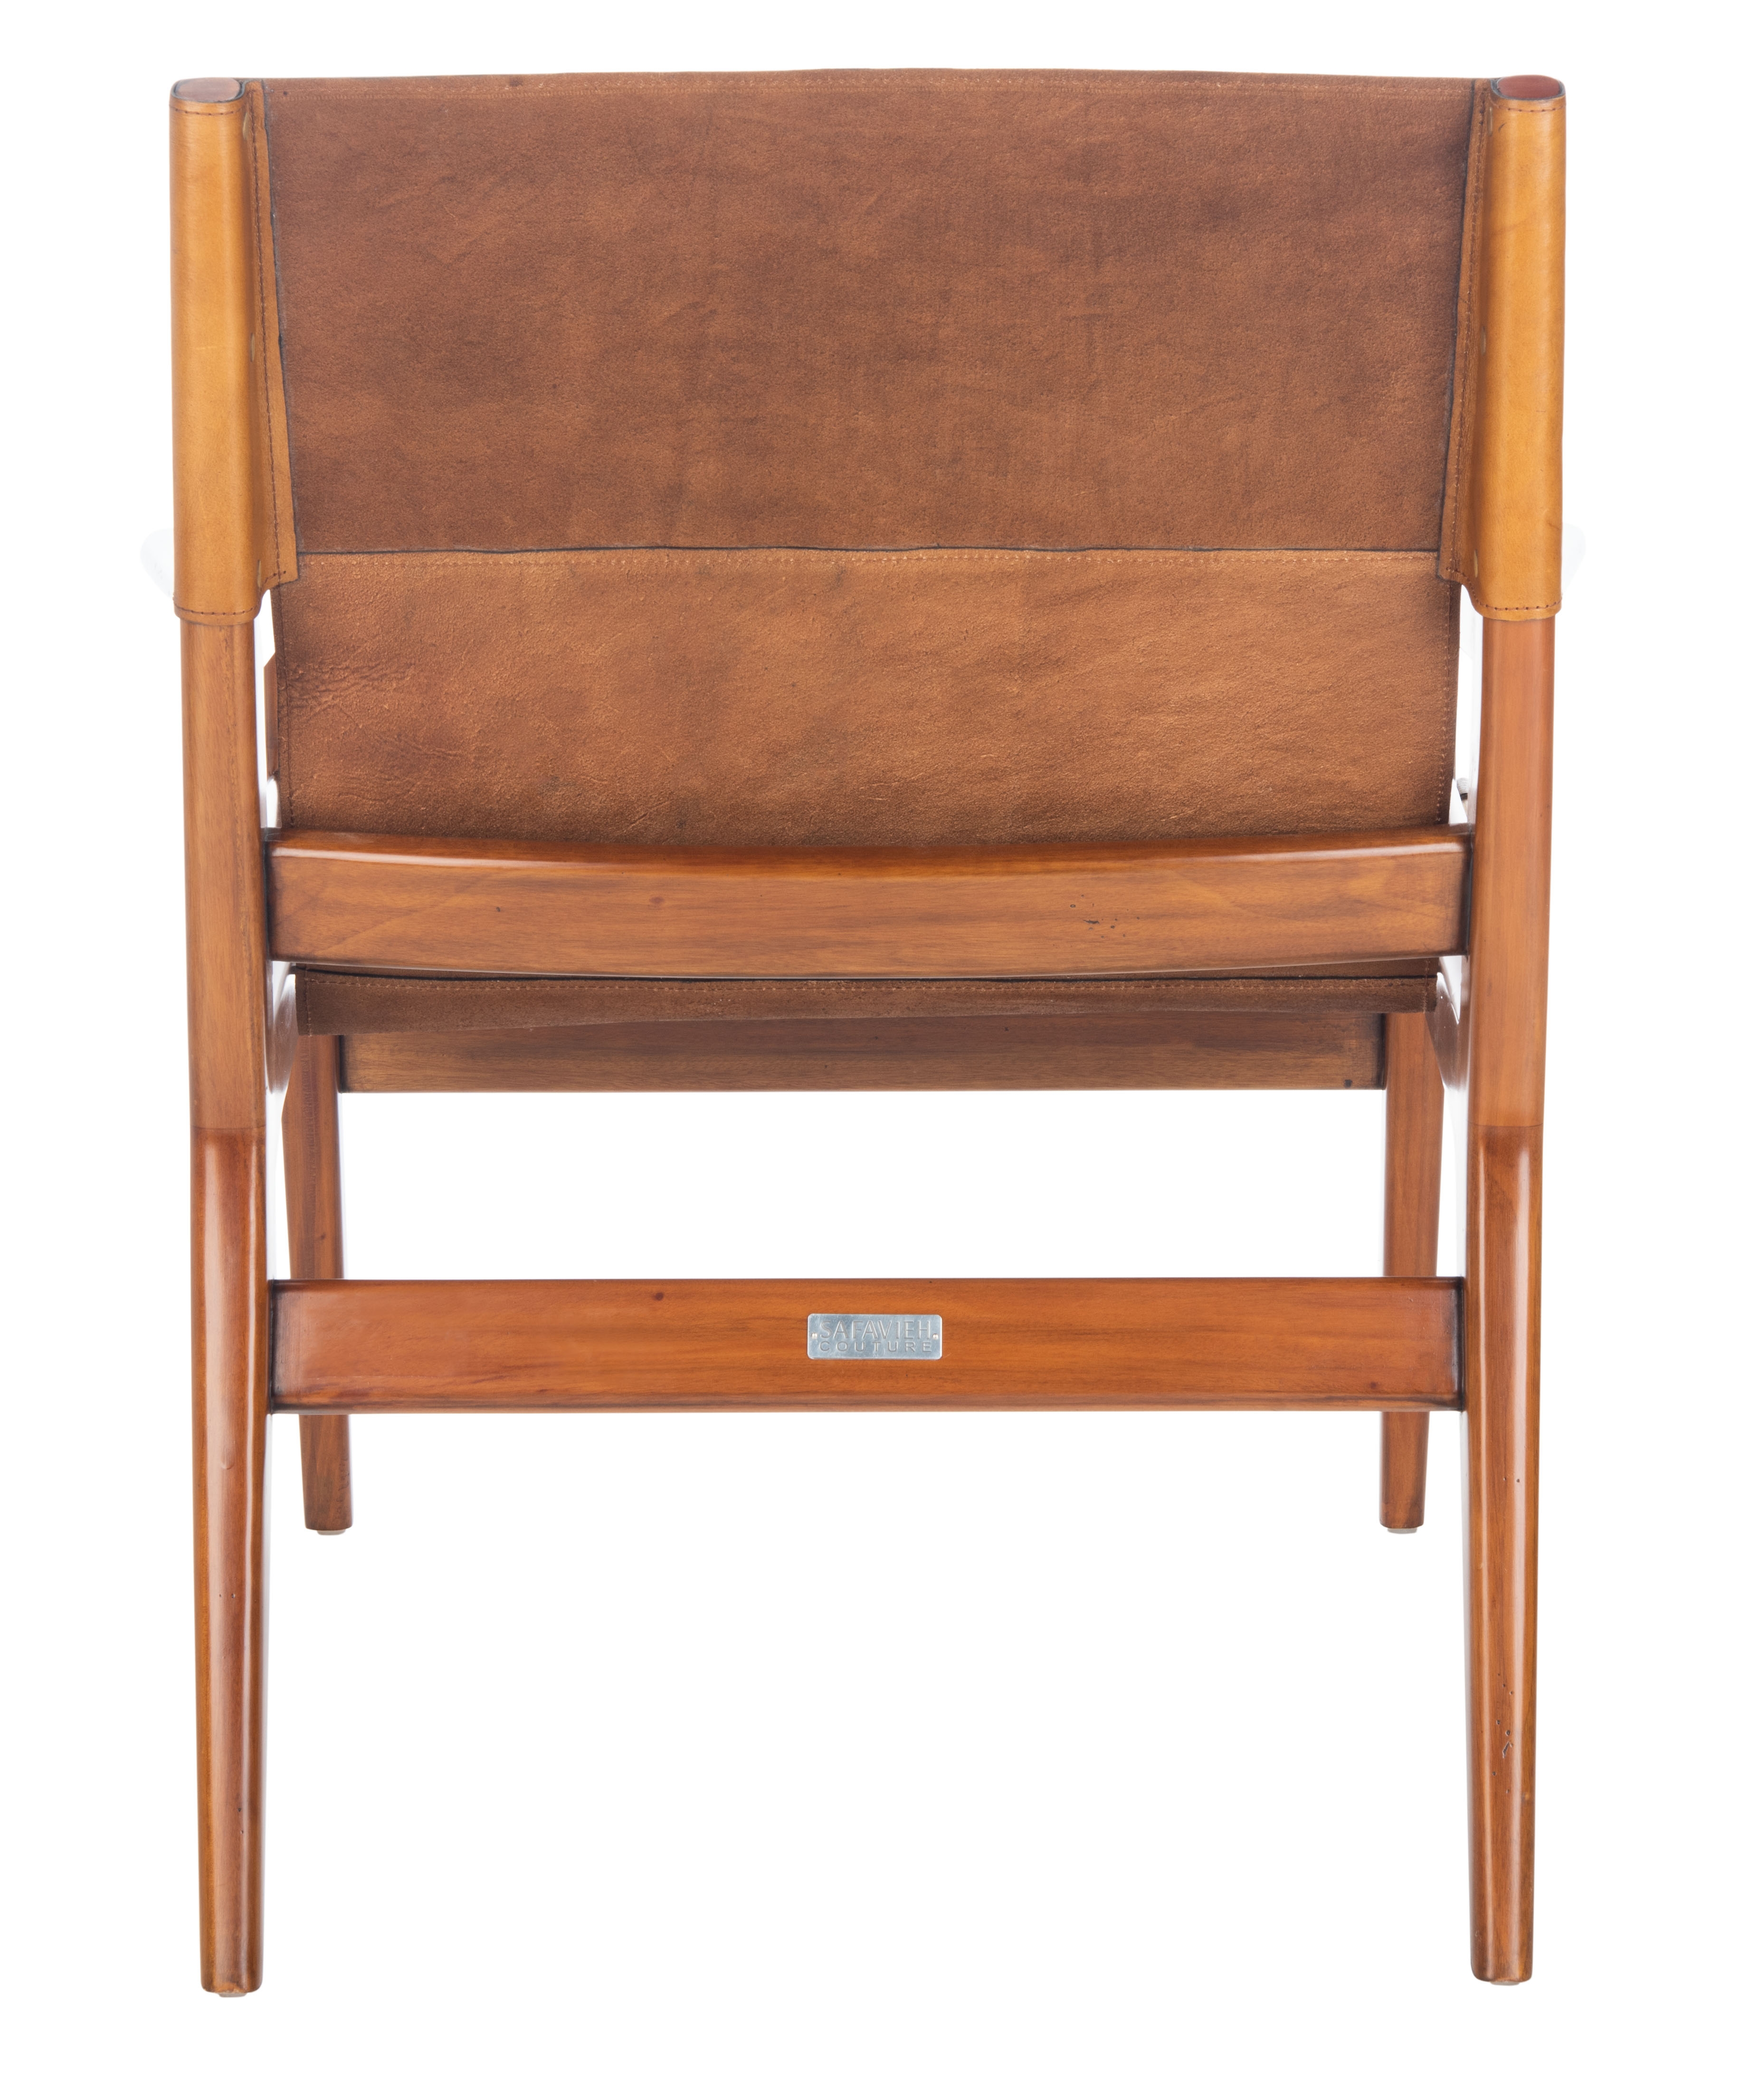 Pavati Leather Sling Chair, Brown - Image 4